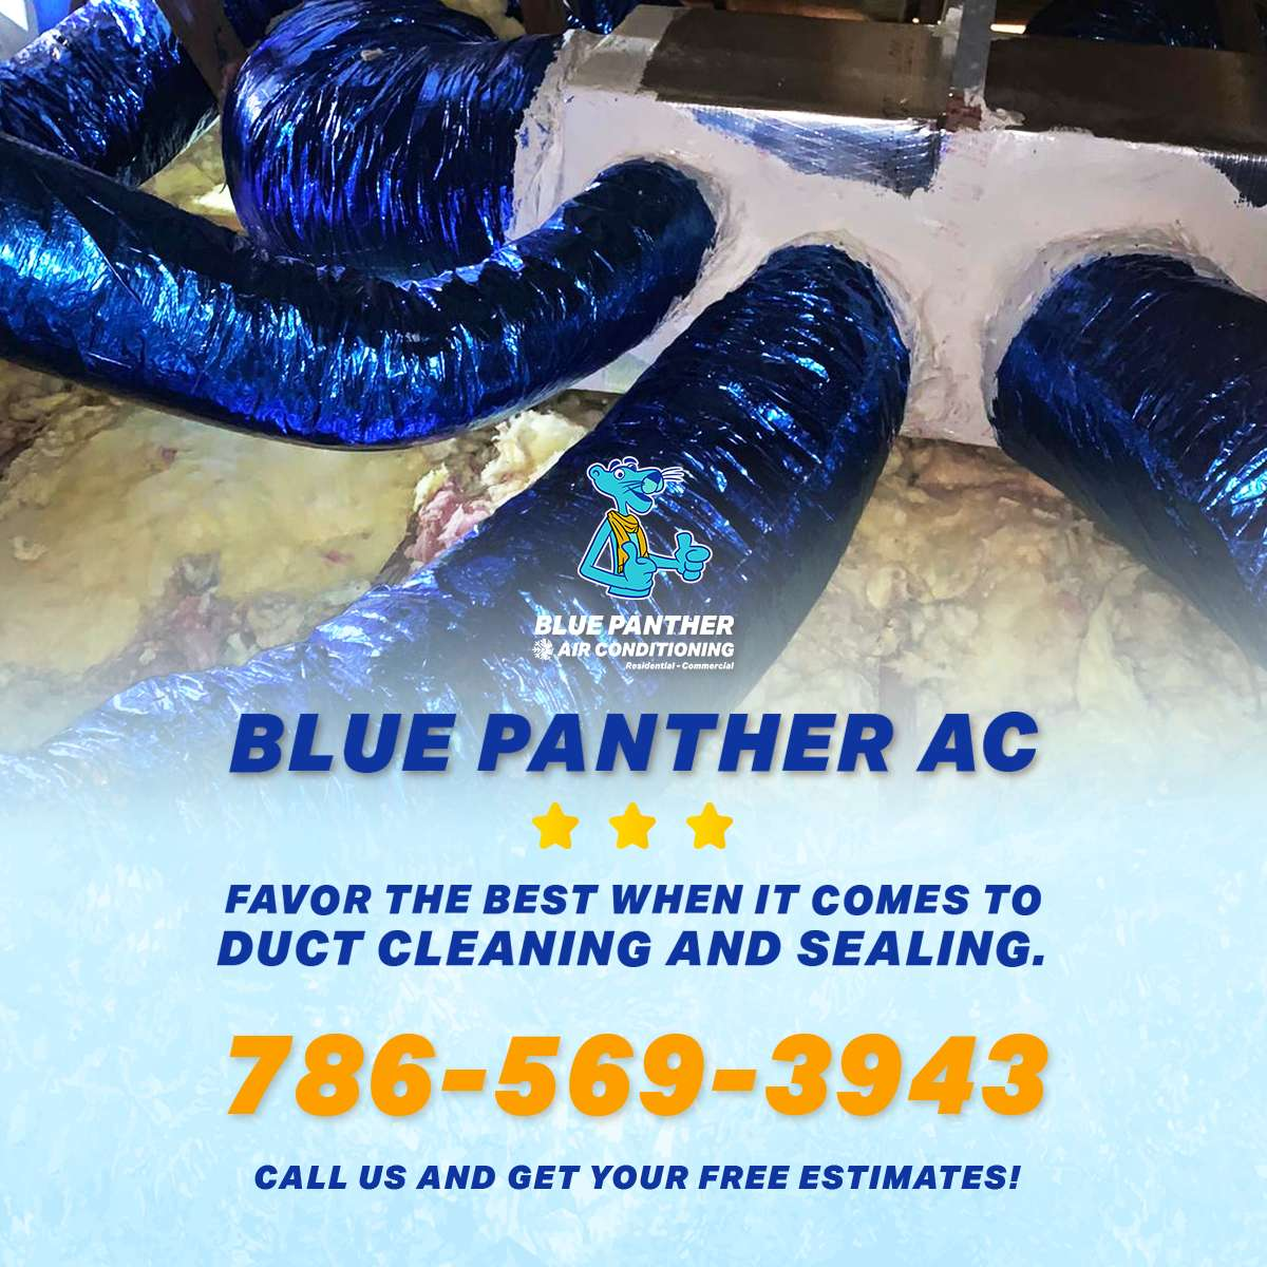 Duct Cleaning And Sealing